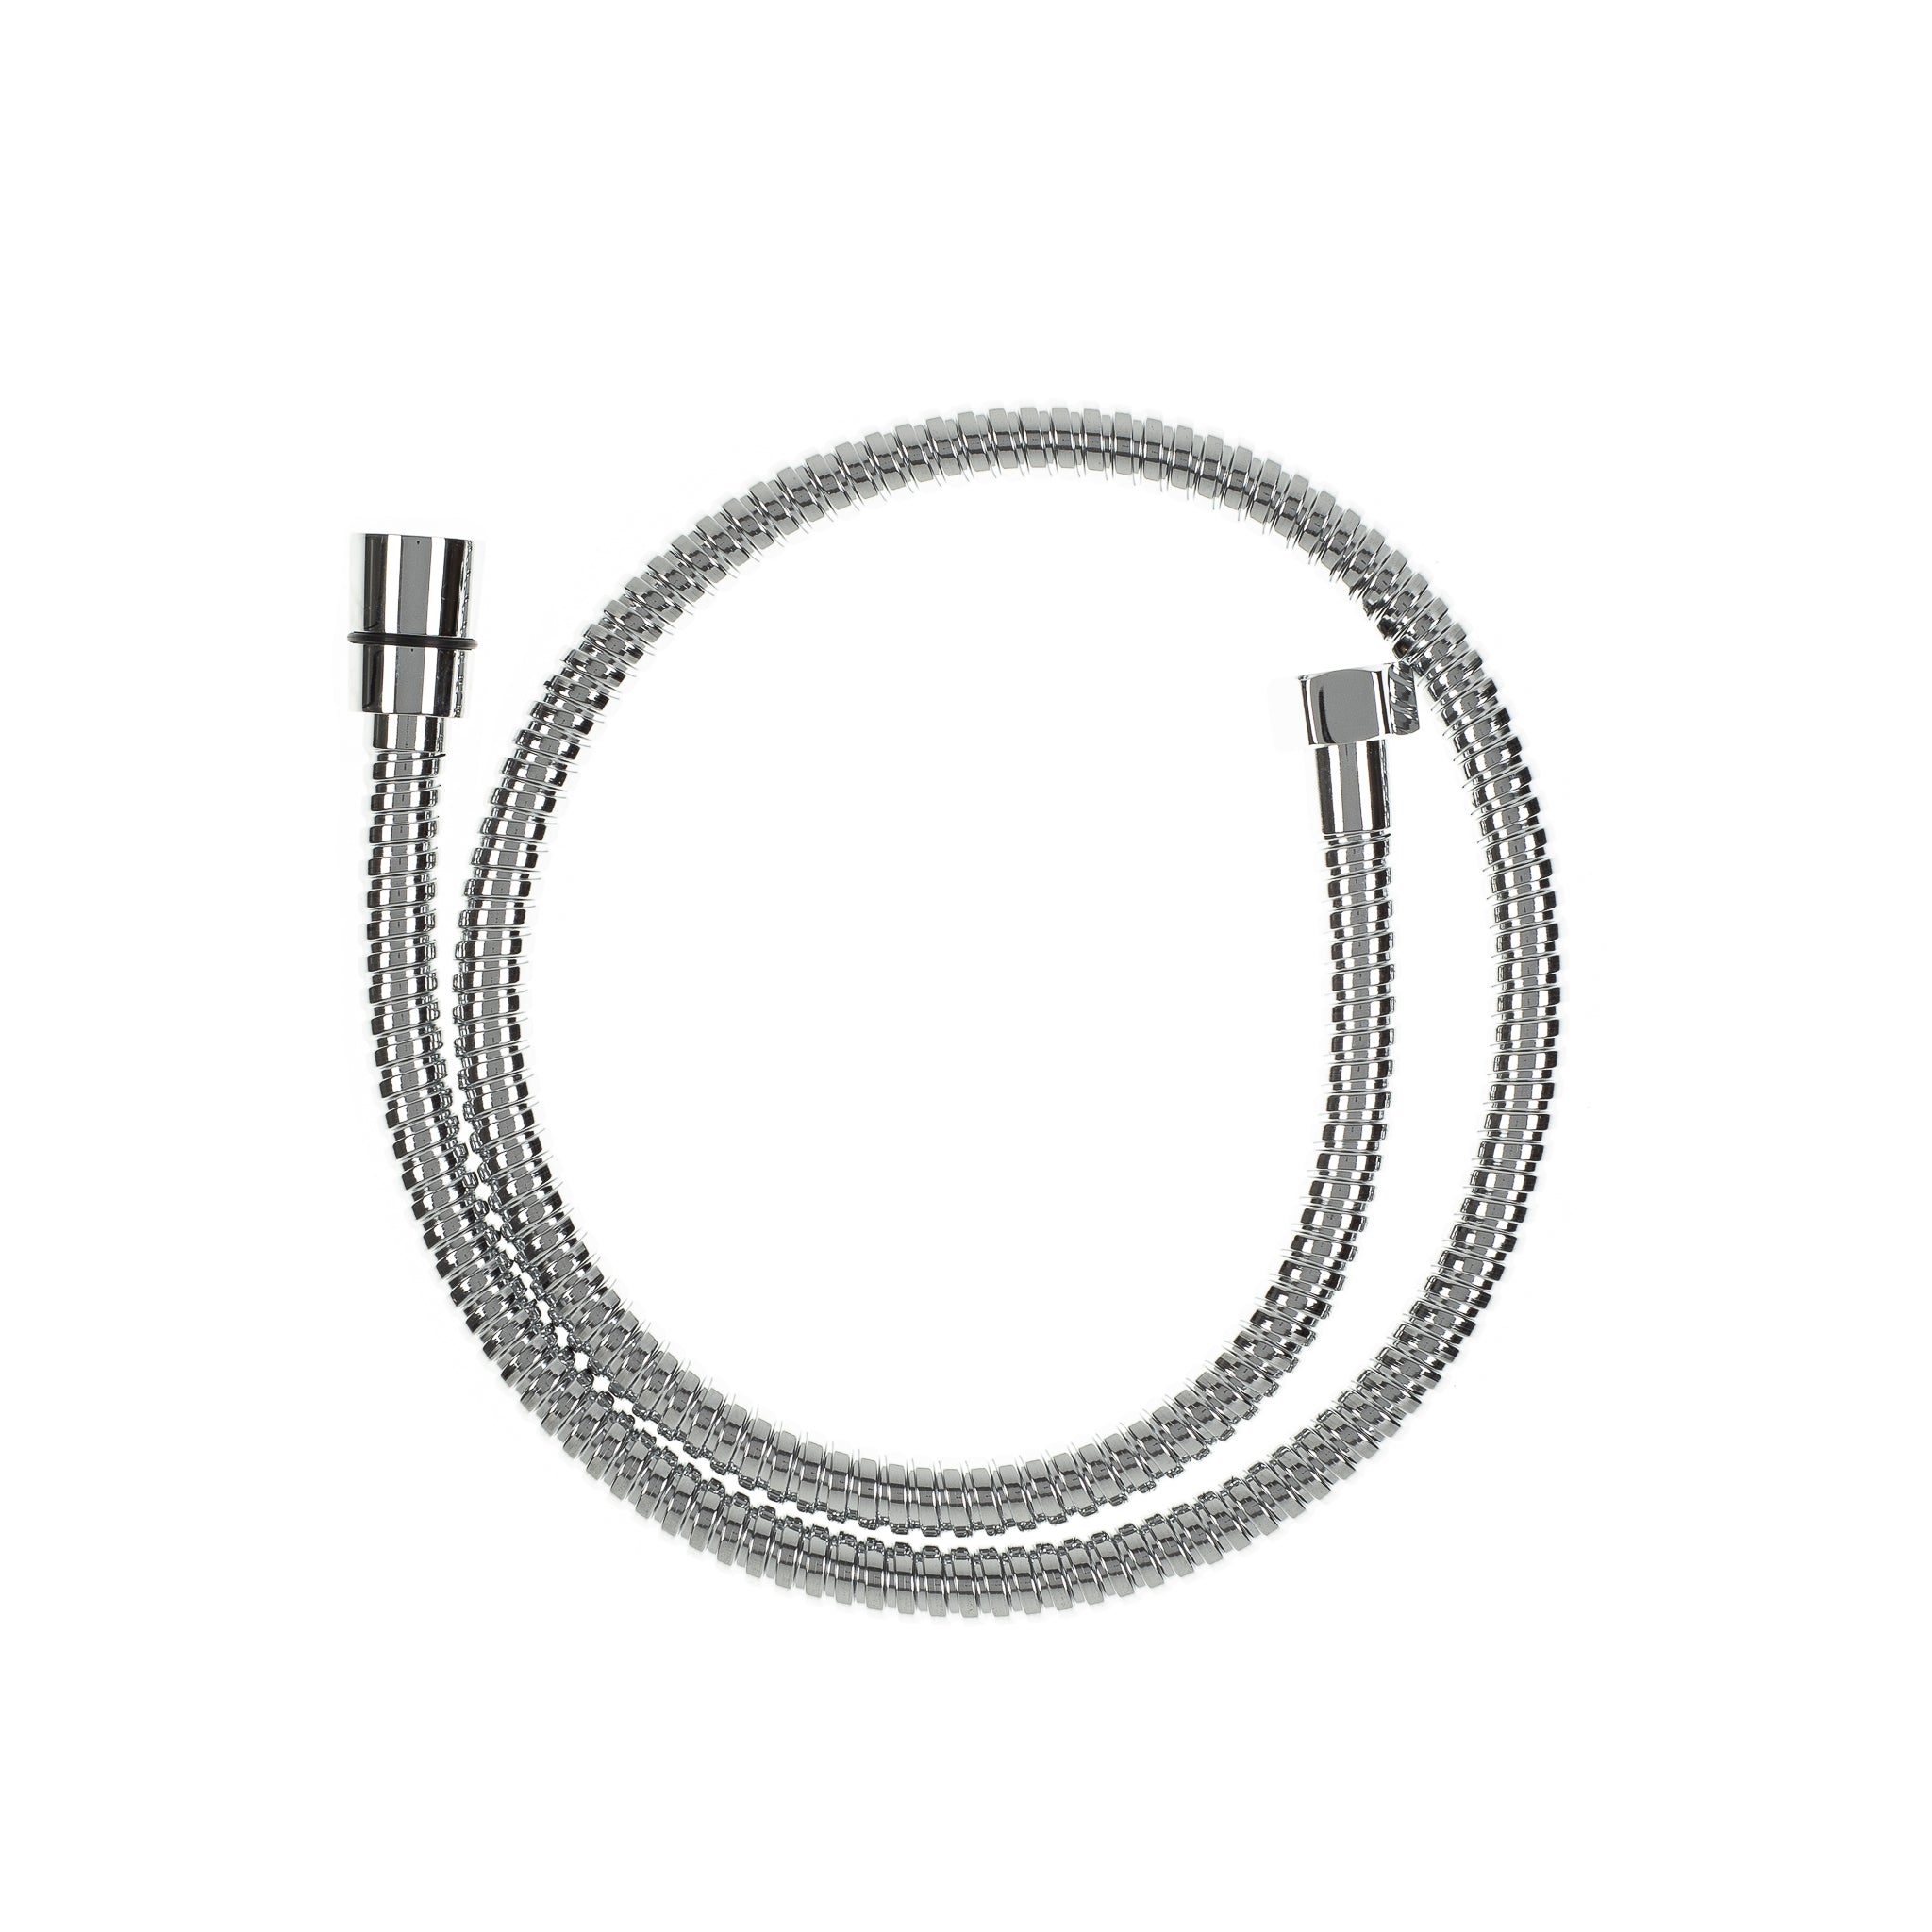 Stainless Steel Shower Hose - 1000mm, Polished Chrome